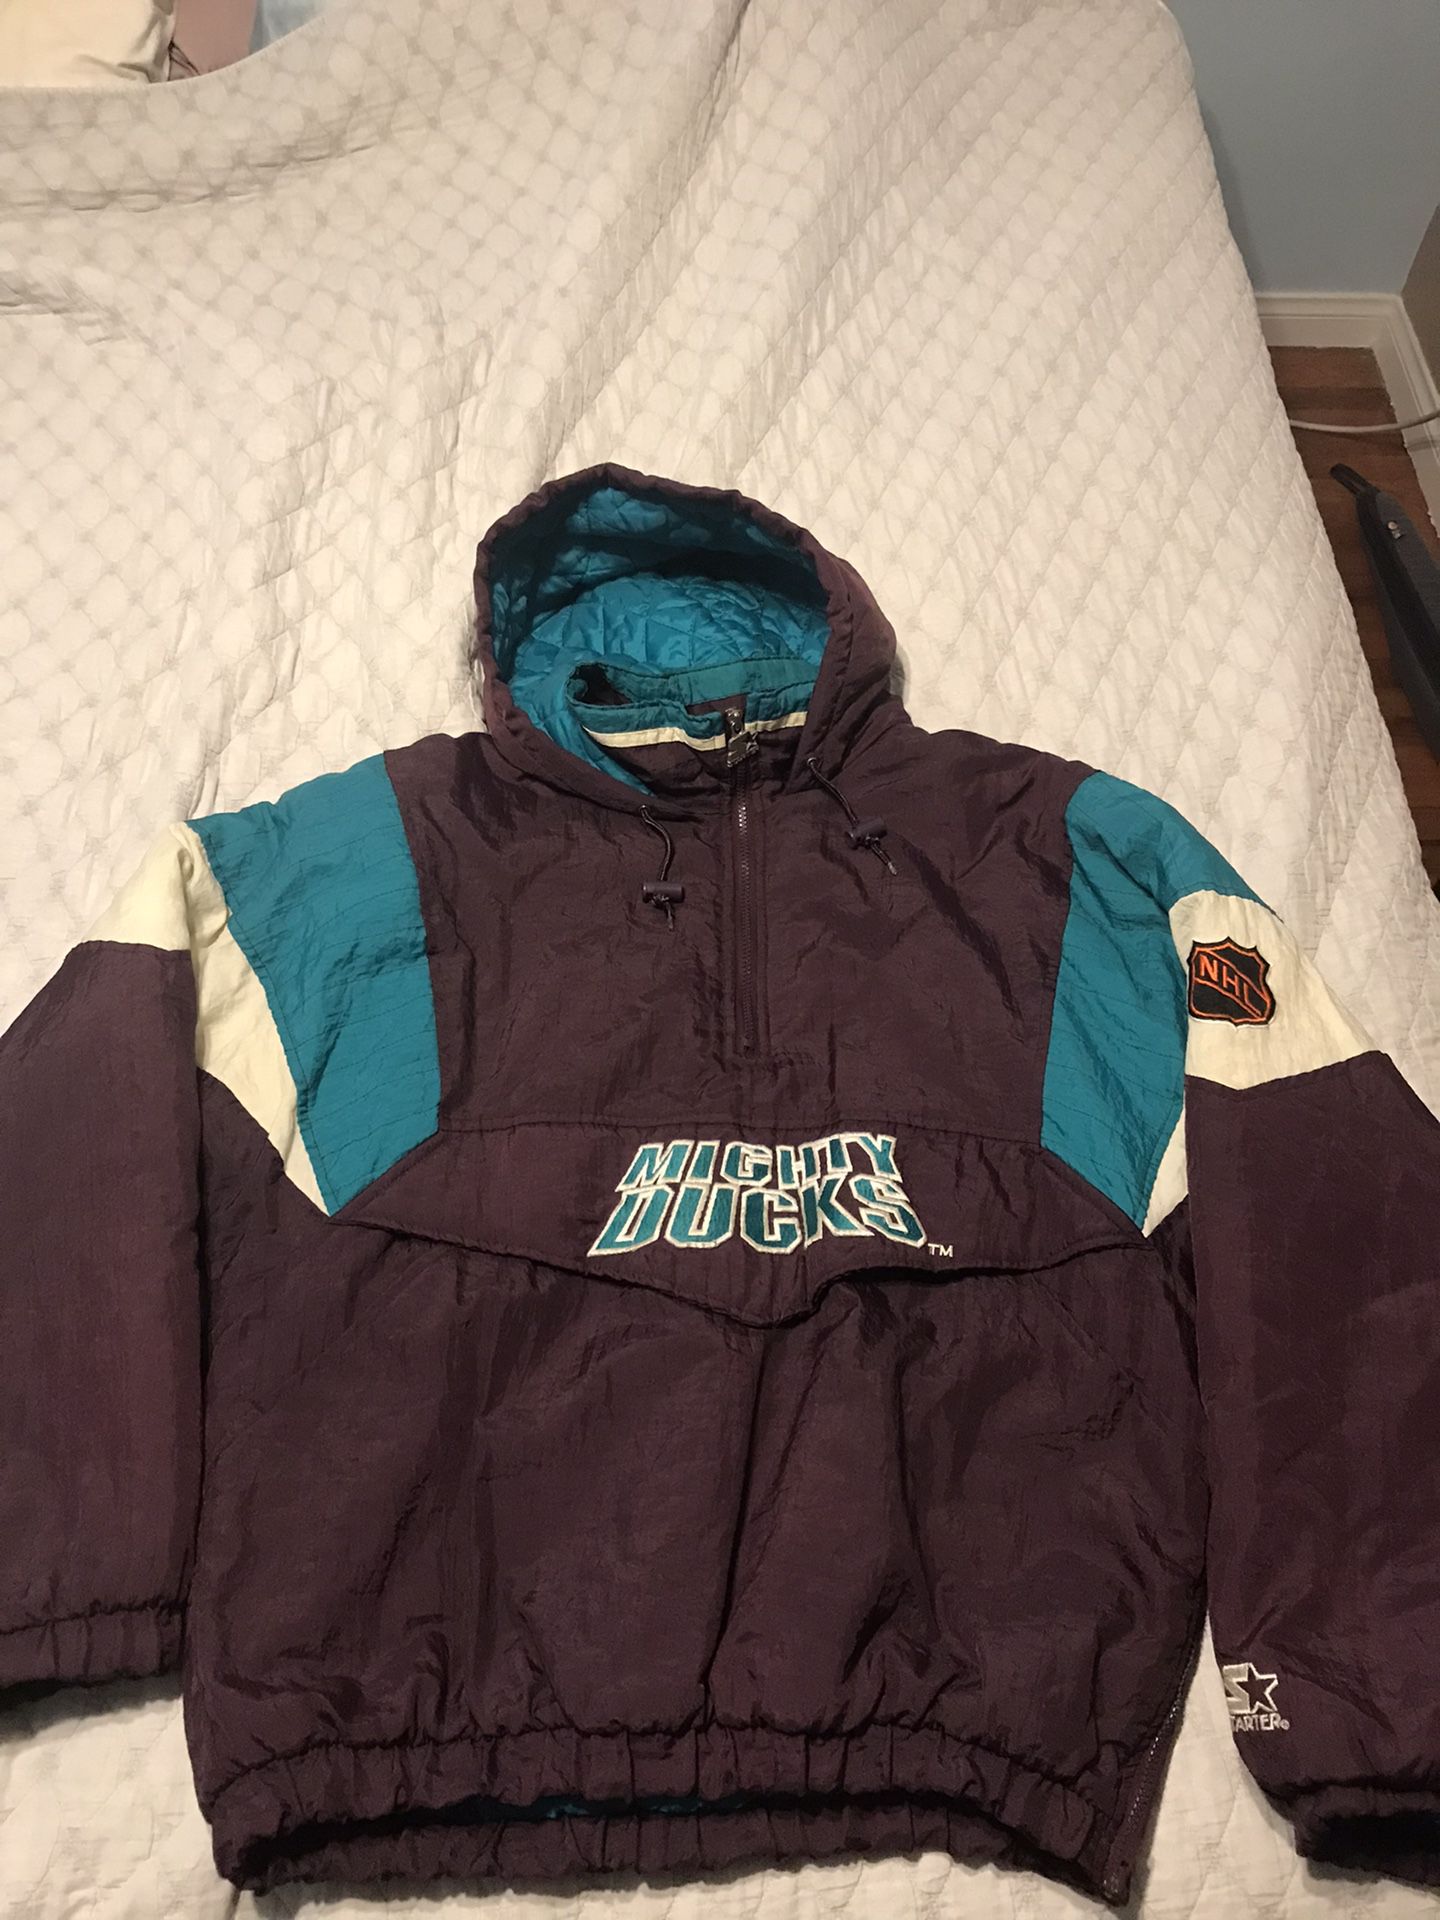 Vintage Mighty Ducks Starter Jacket for Sale in Chino Hills, CA - OfferUp